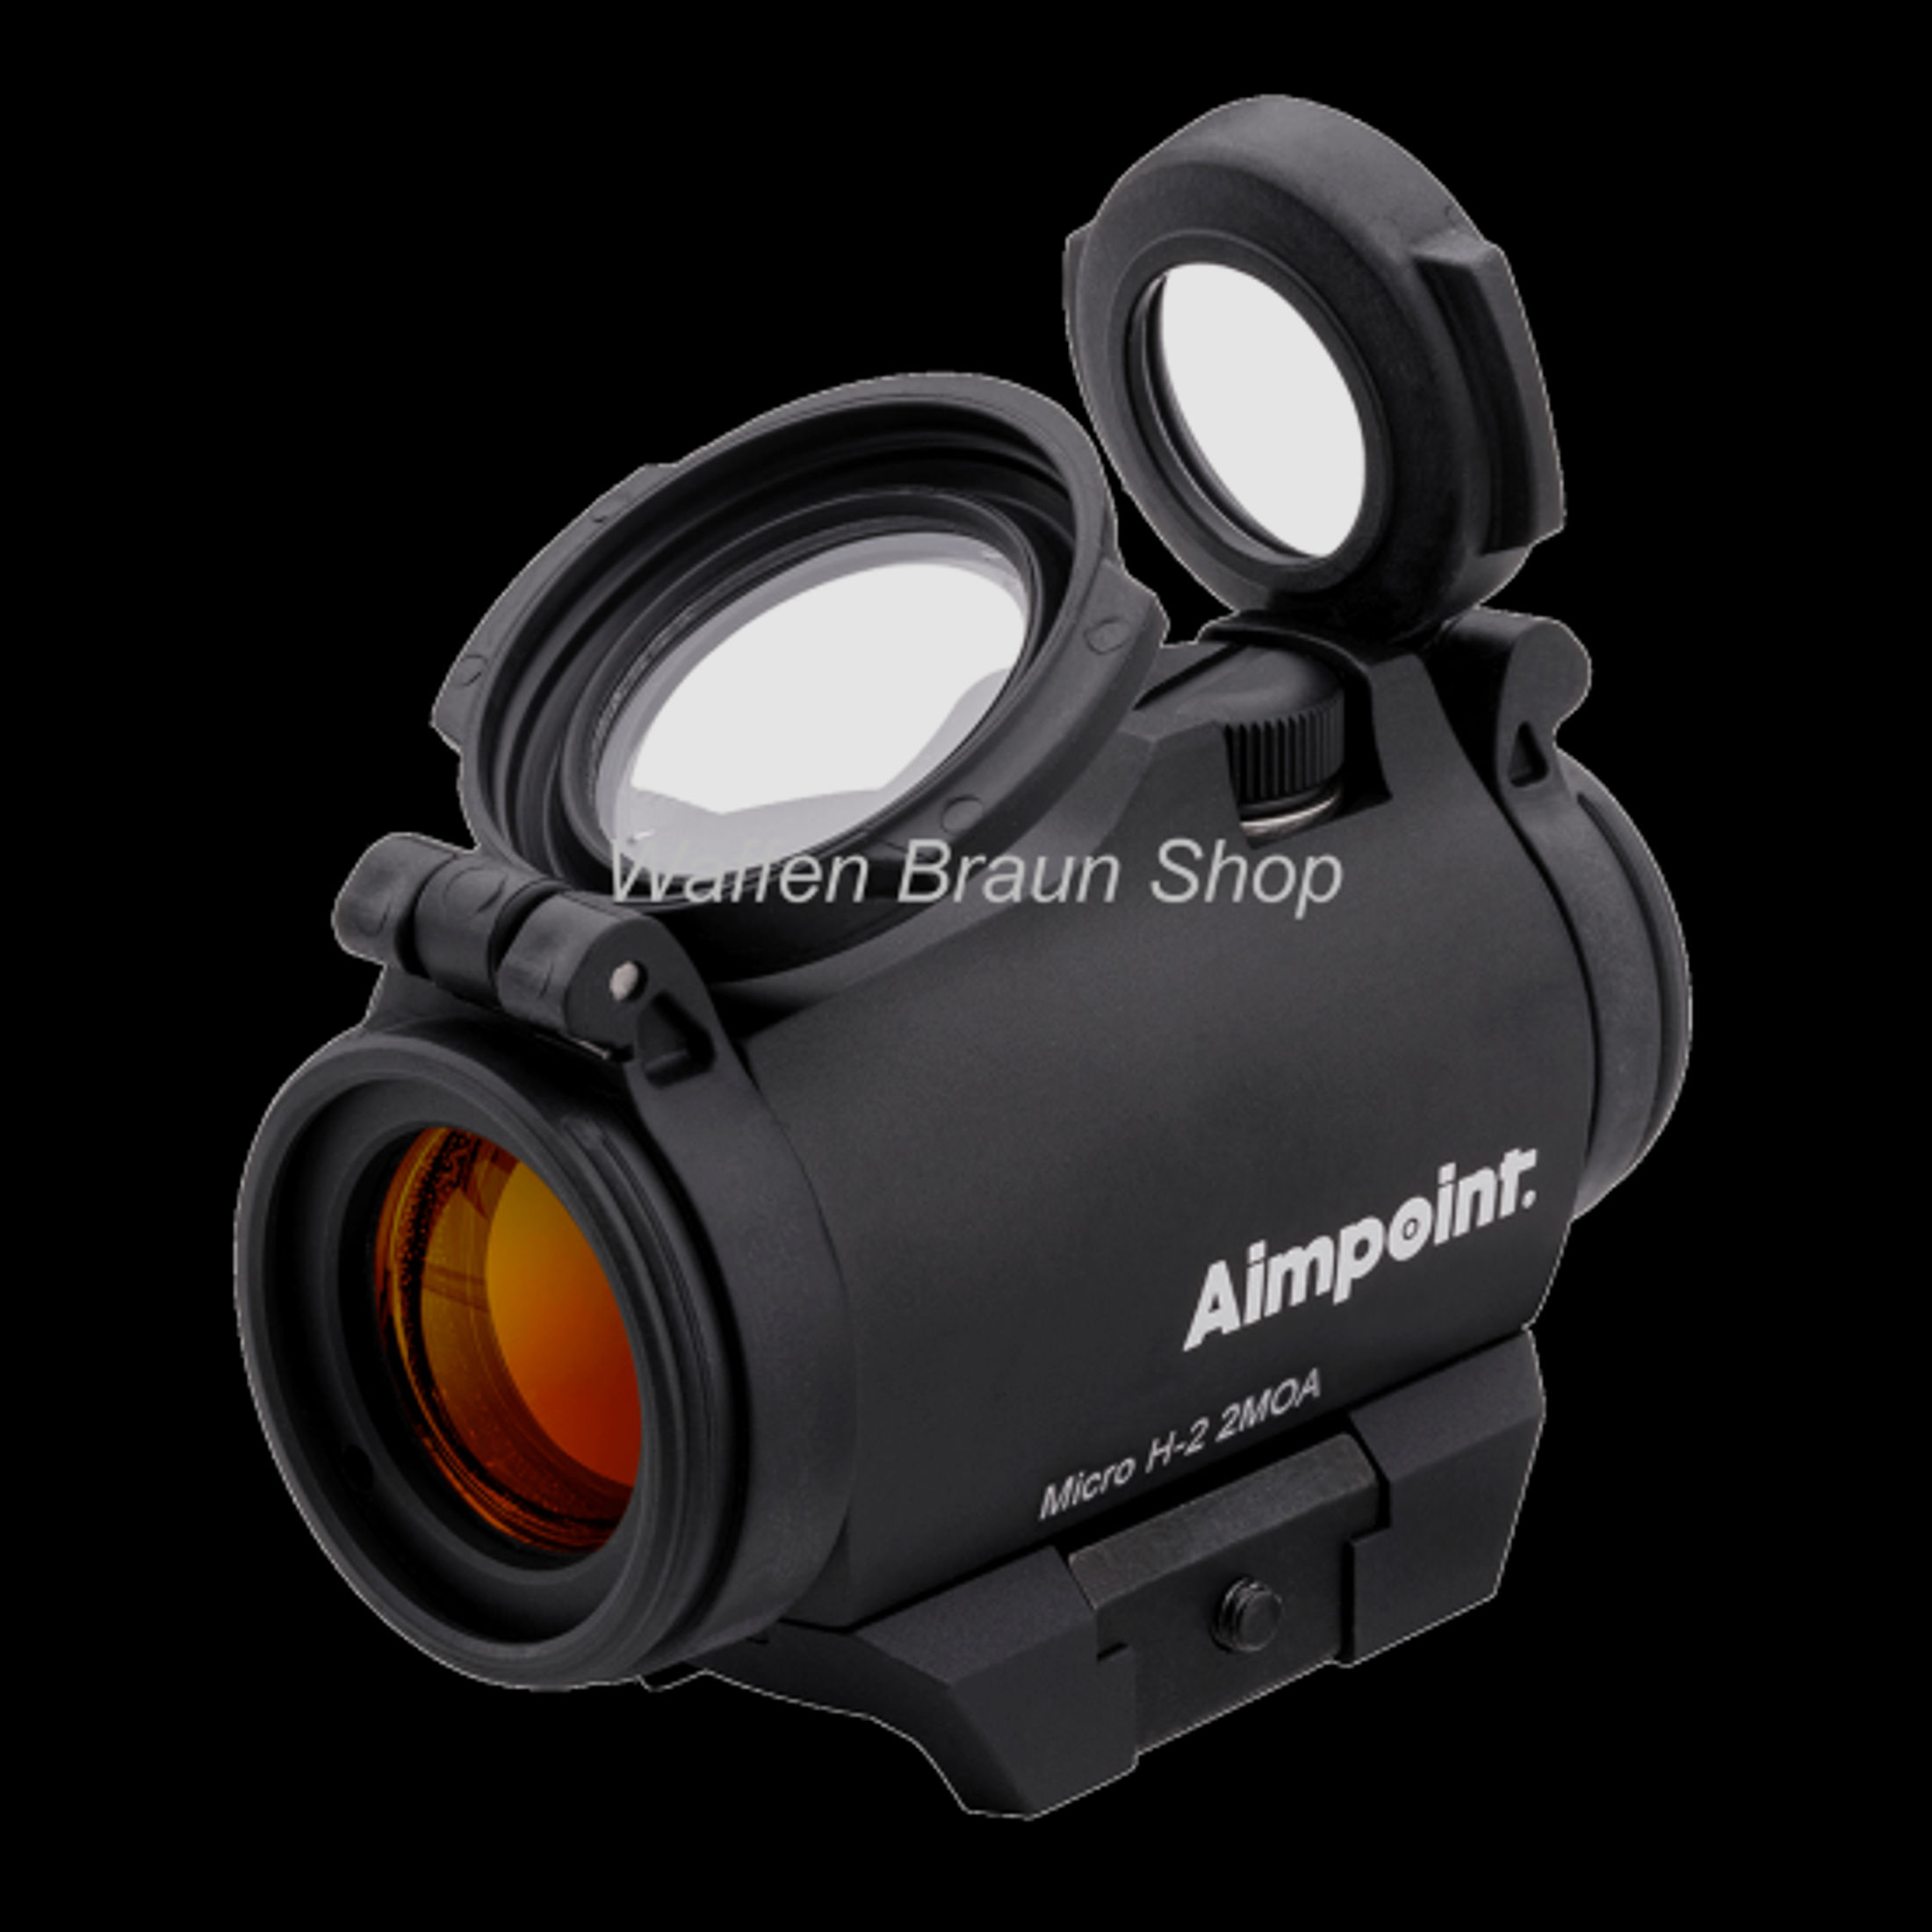 Aimpoint Mod. Micro H-2 2 MOA / Schwarz / ohne Adapter